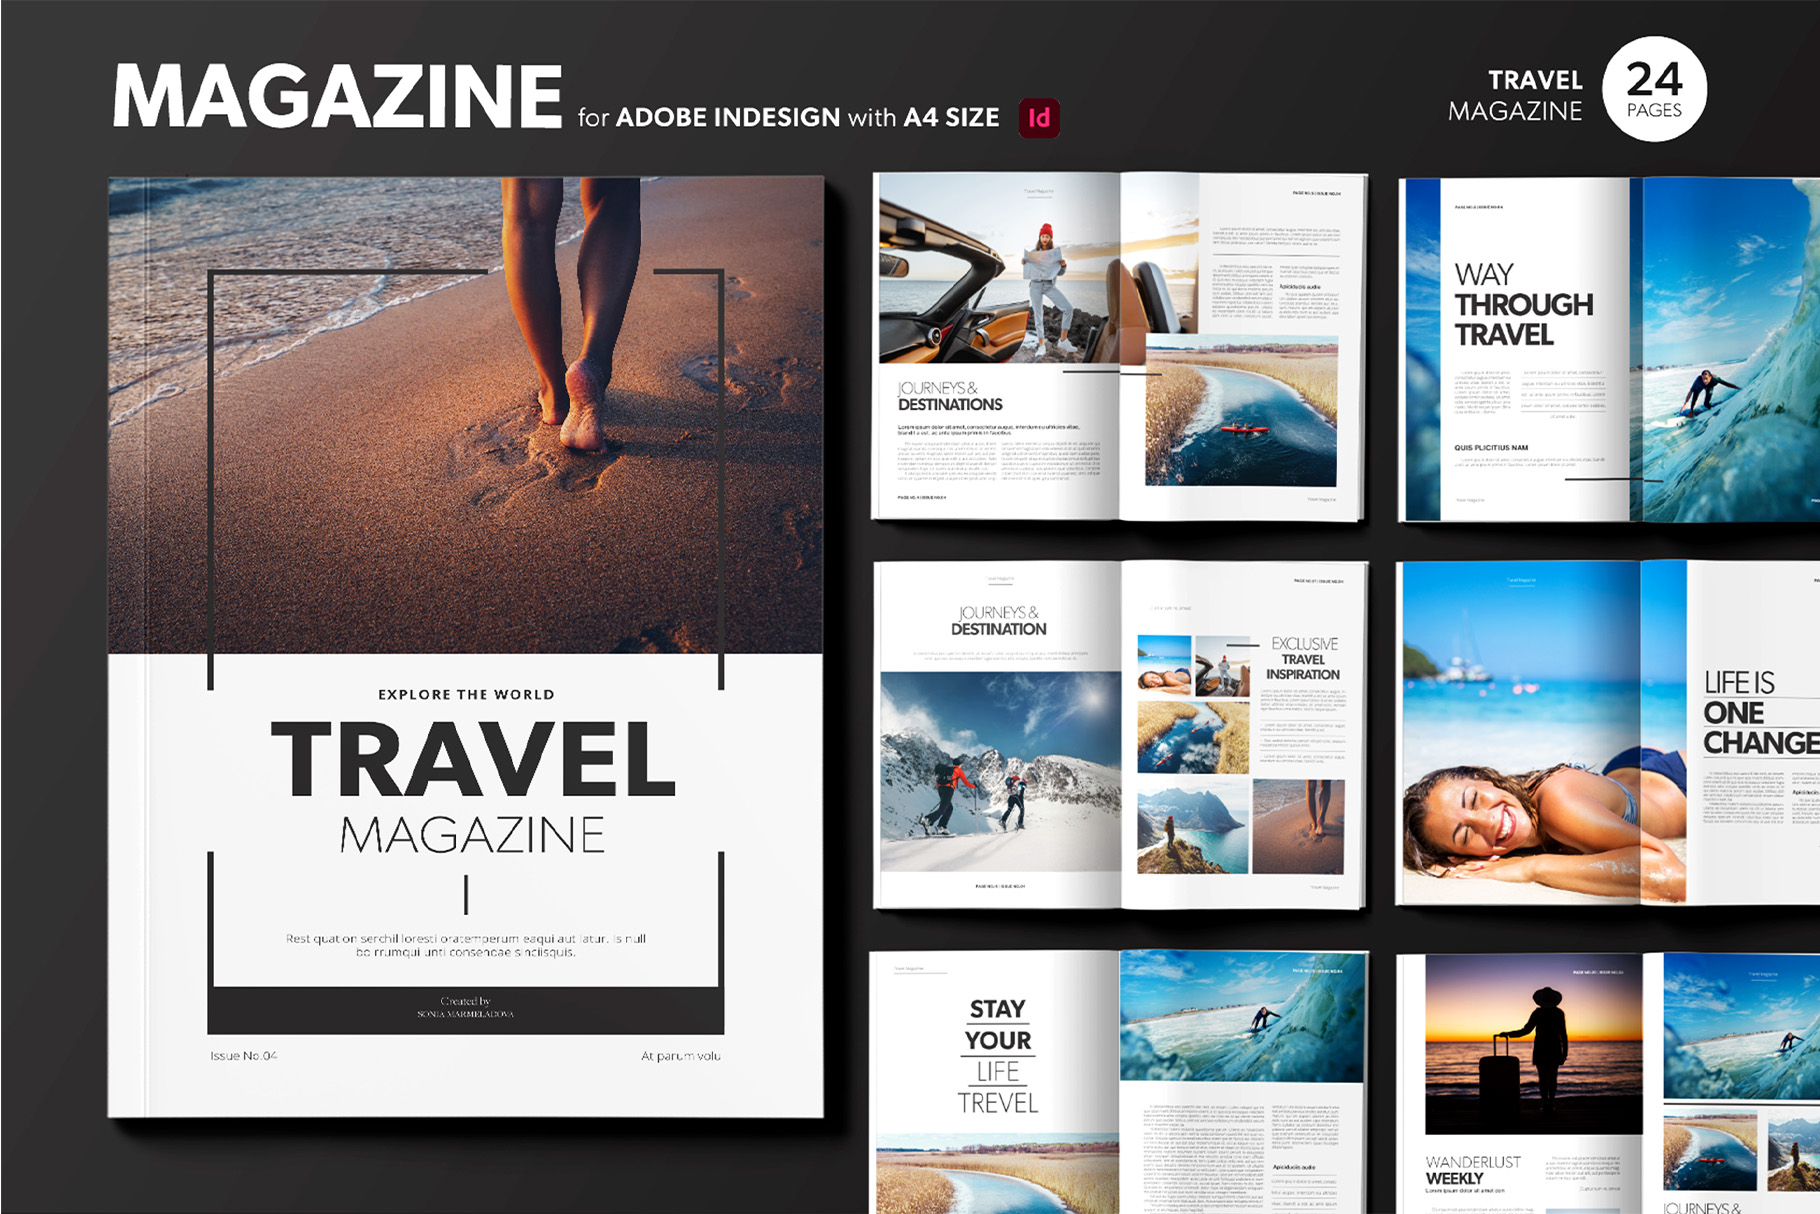 Simple Magazine Template (INDD Format)